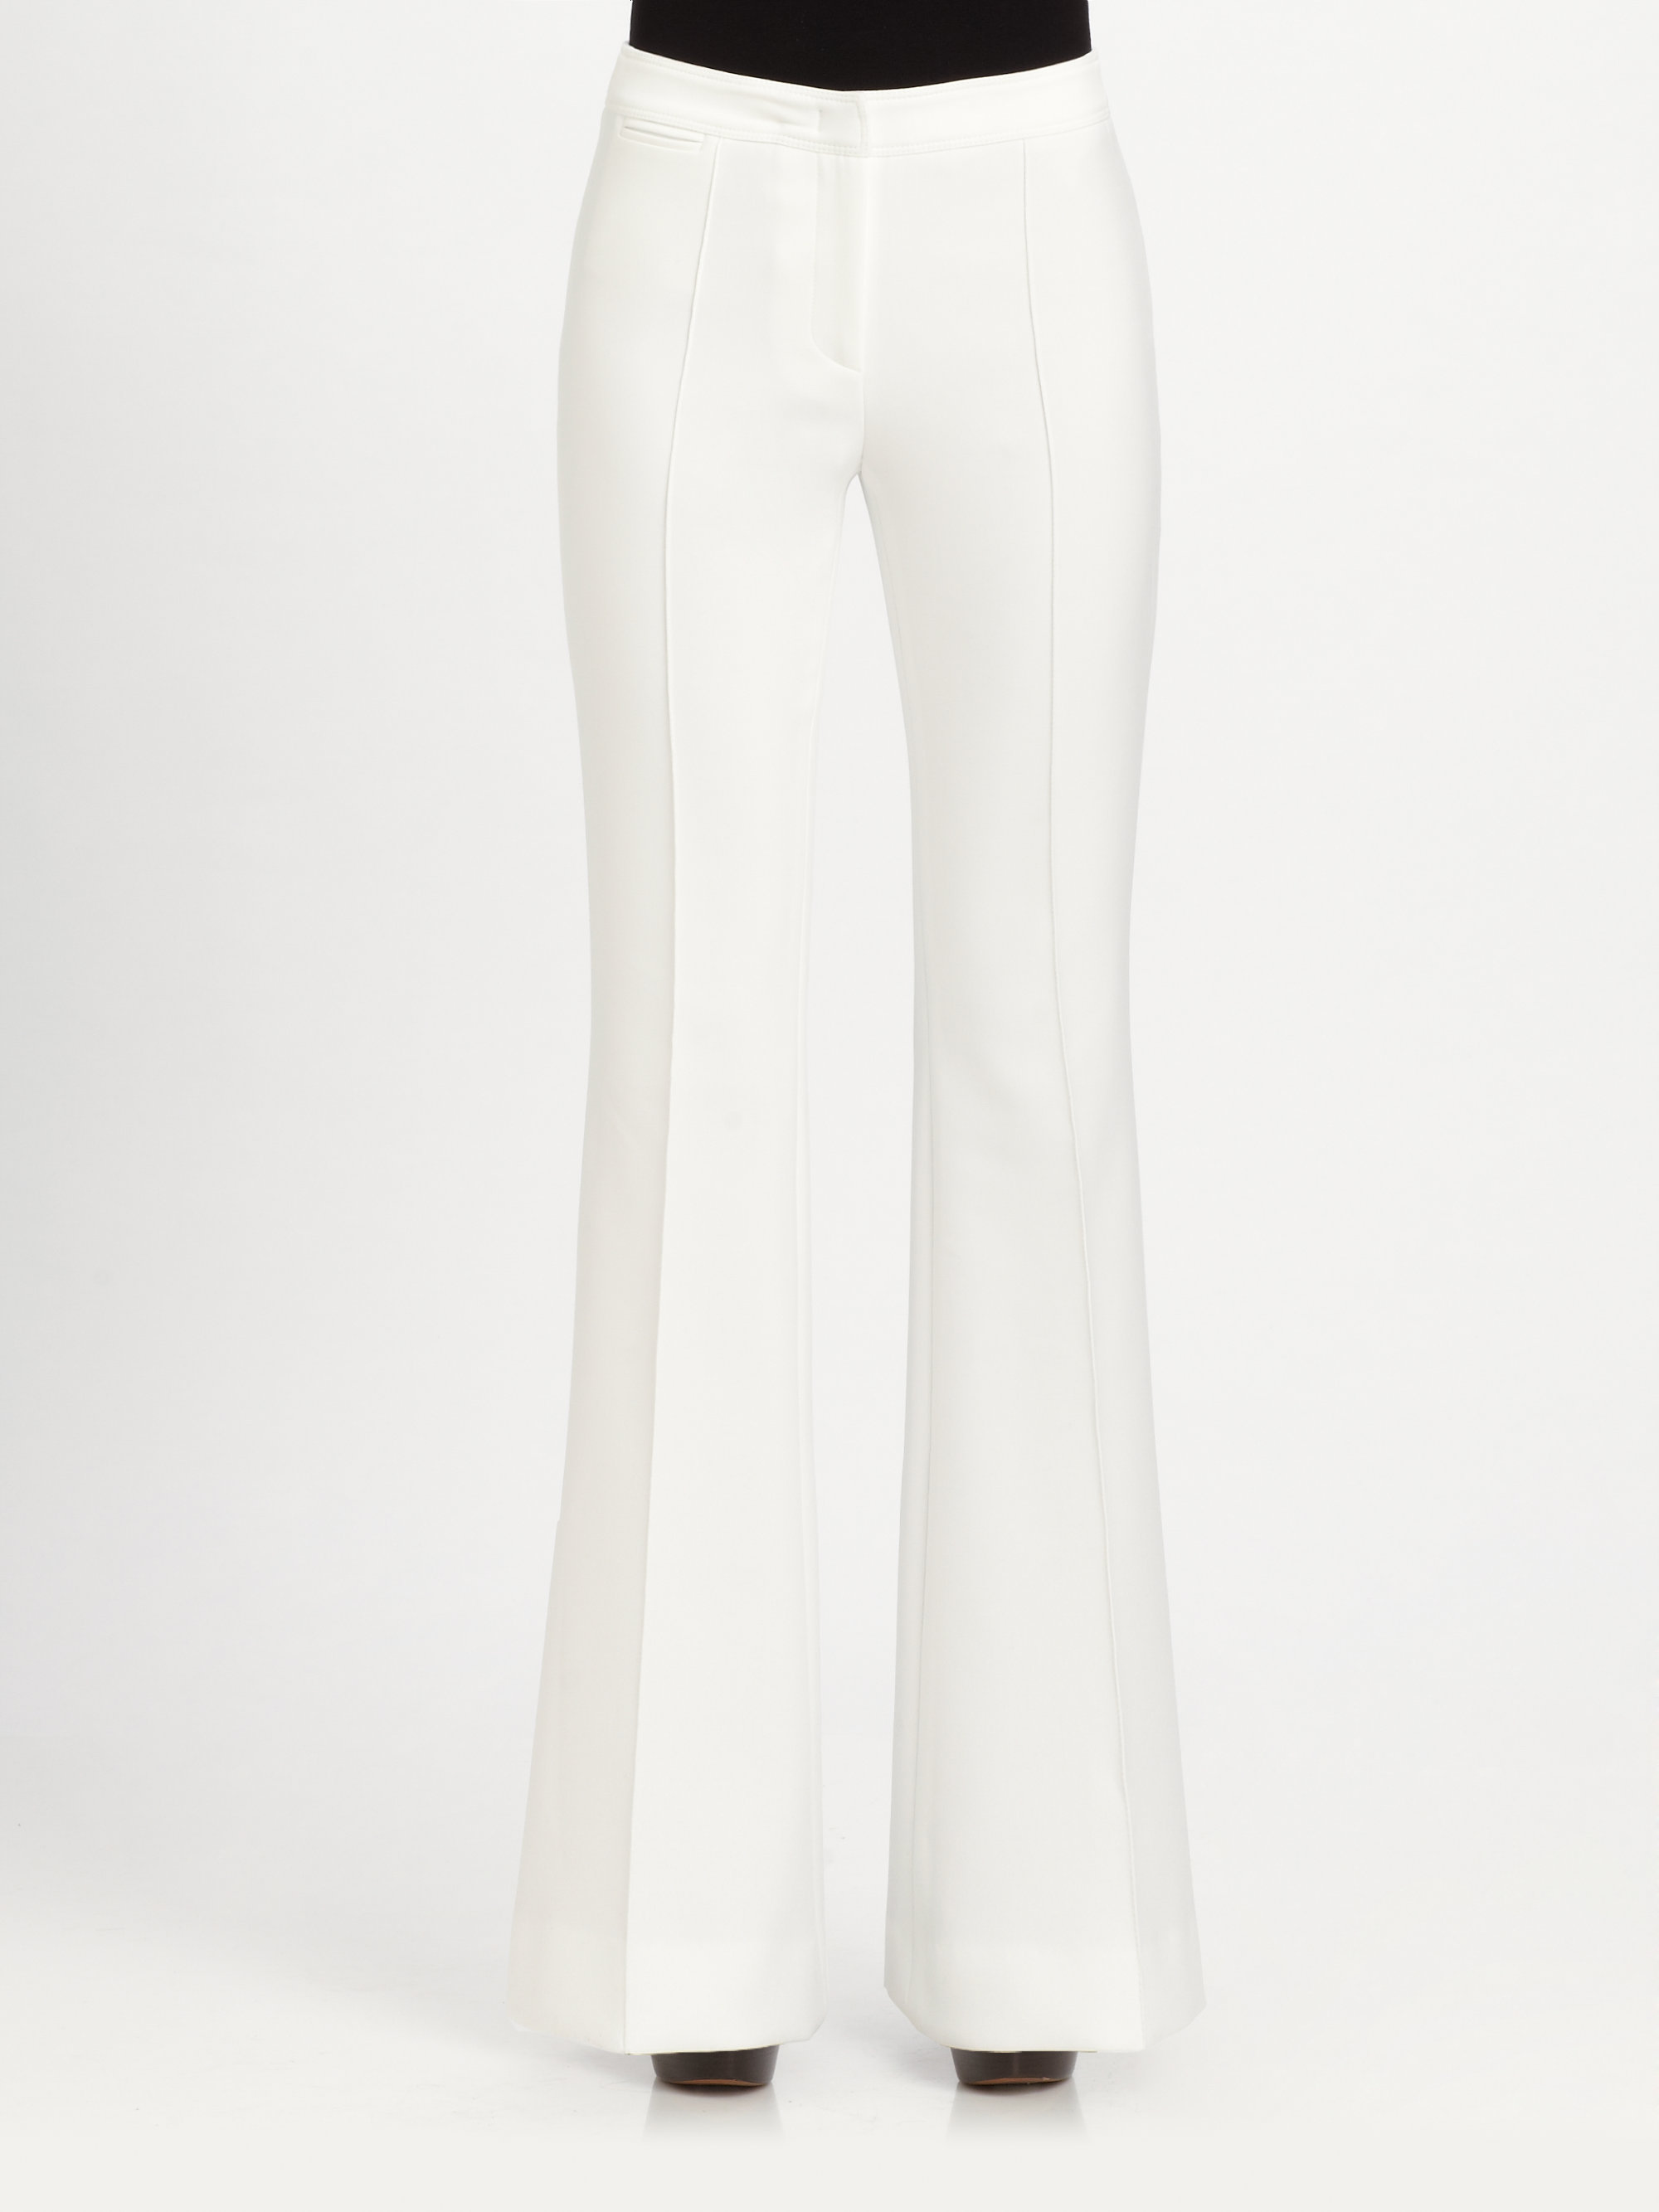 Lyst - Burberry Flared Trousers in White